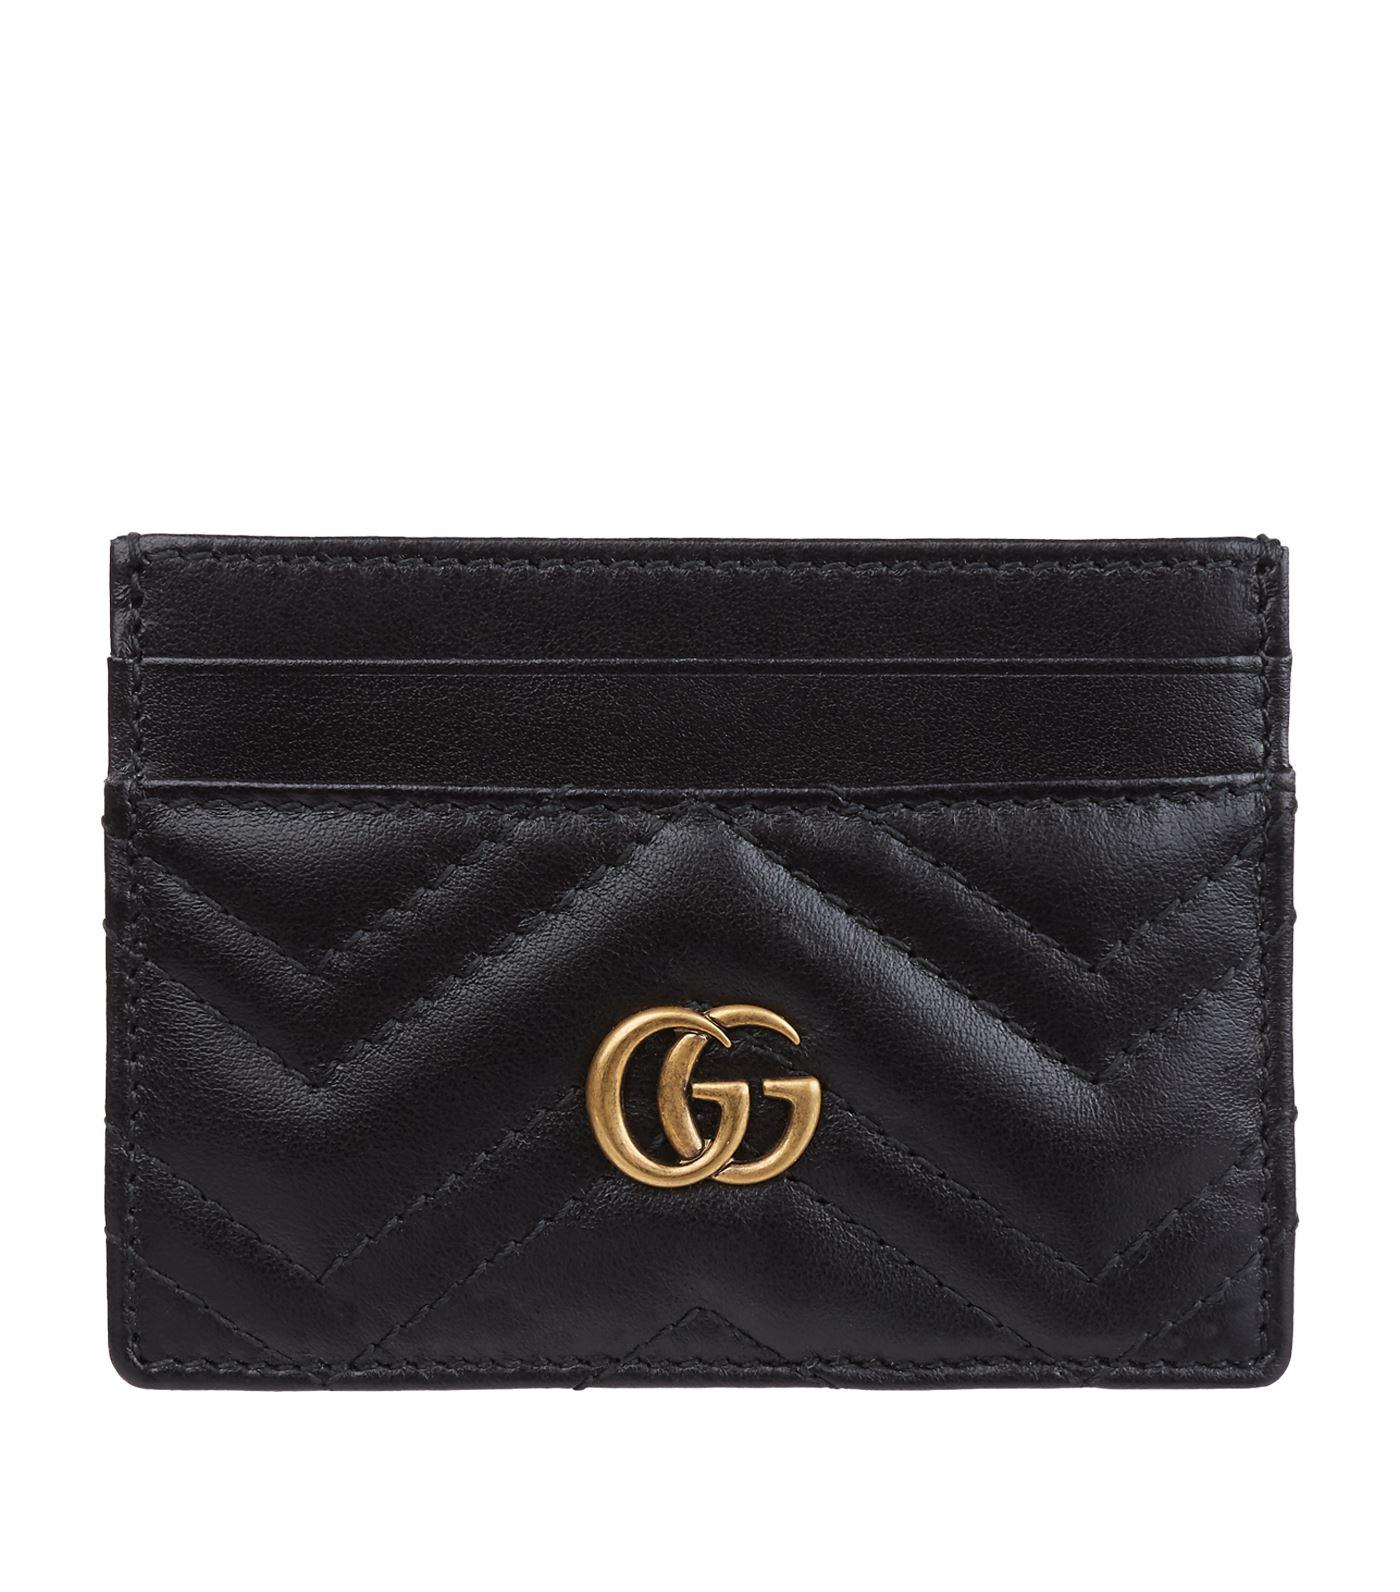 Lyst - Gucci Leather Marmont Card Holder in Black - Save 29.